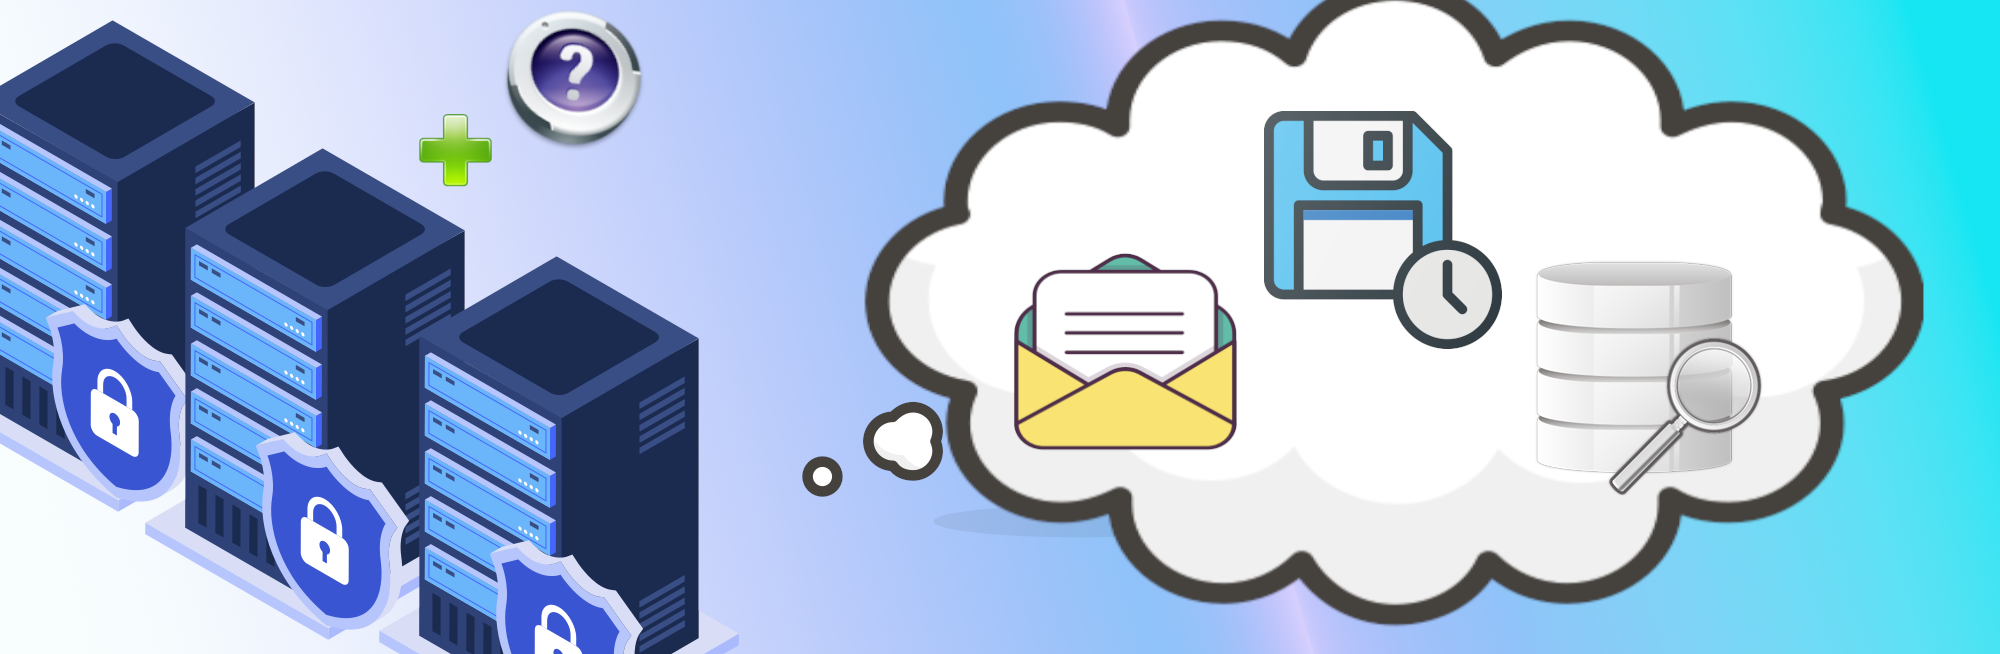 rainmail owncloud support storage server